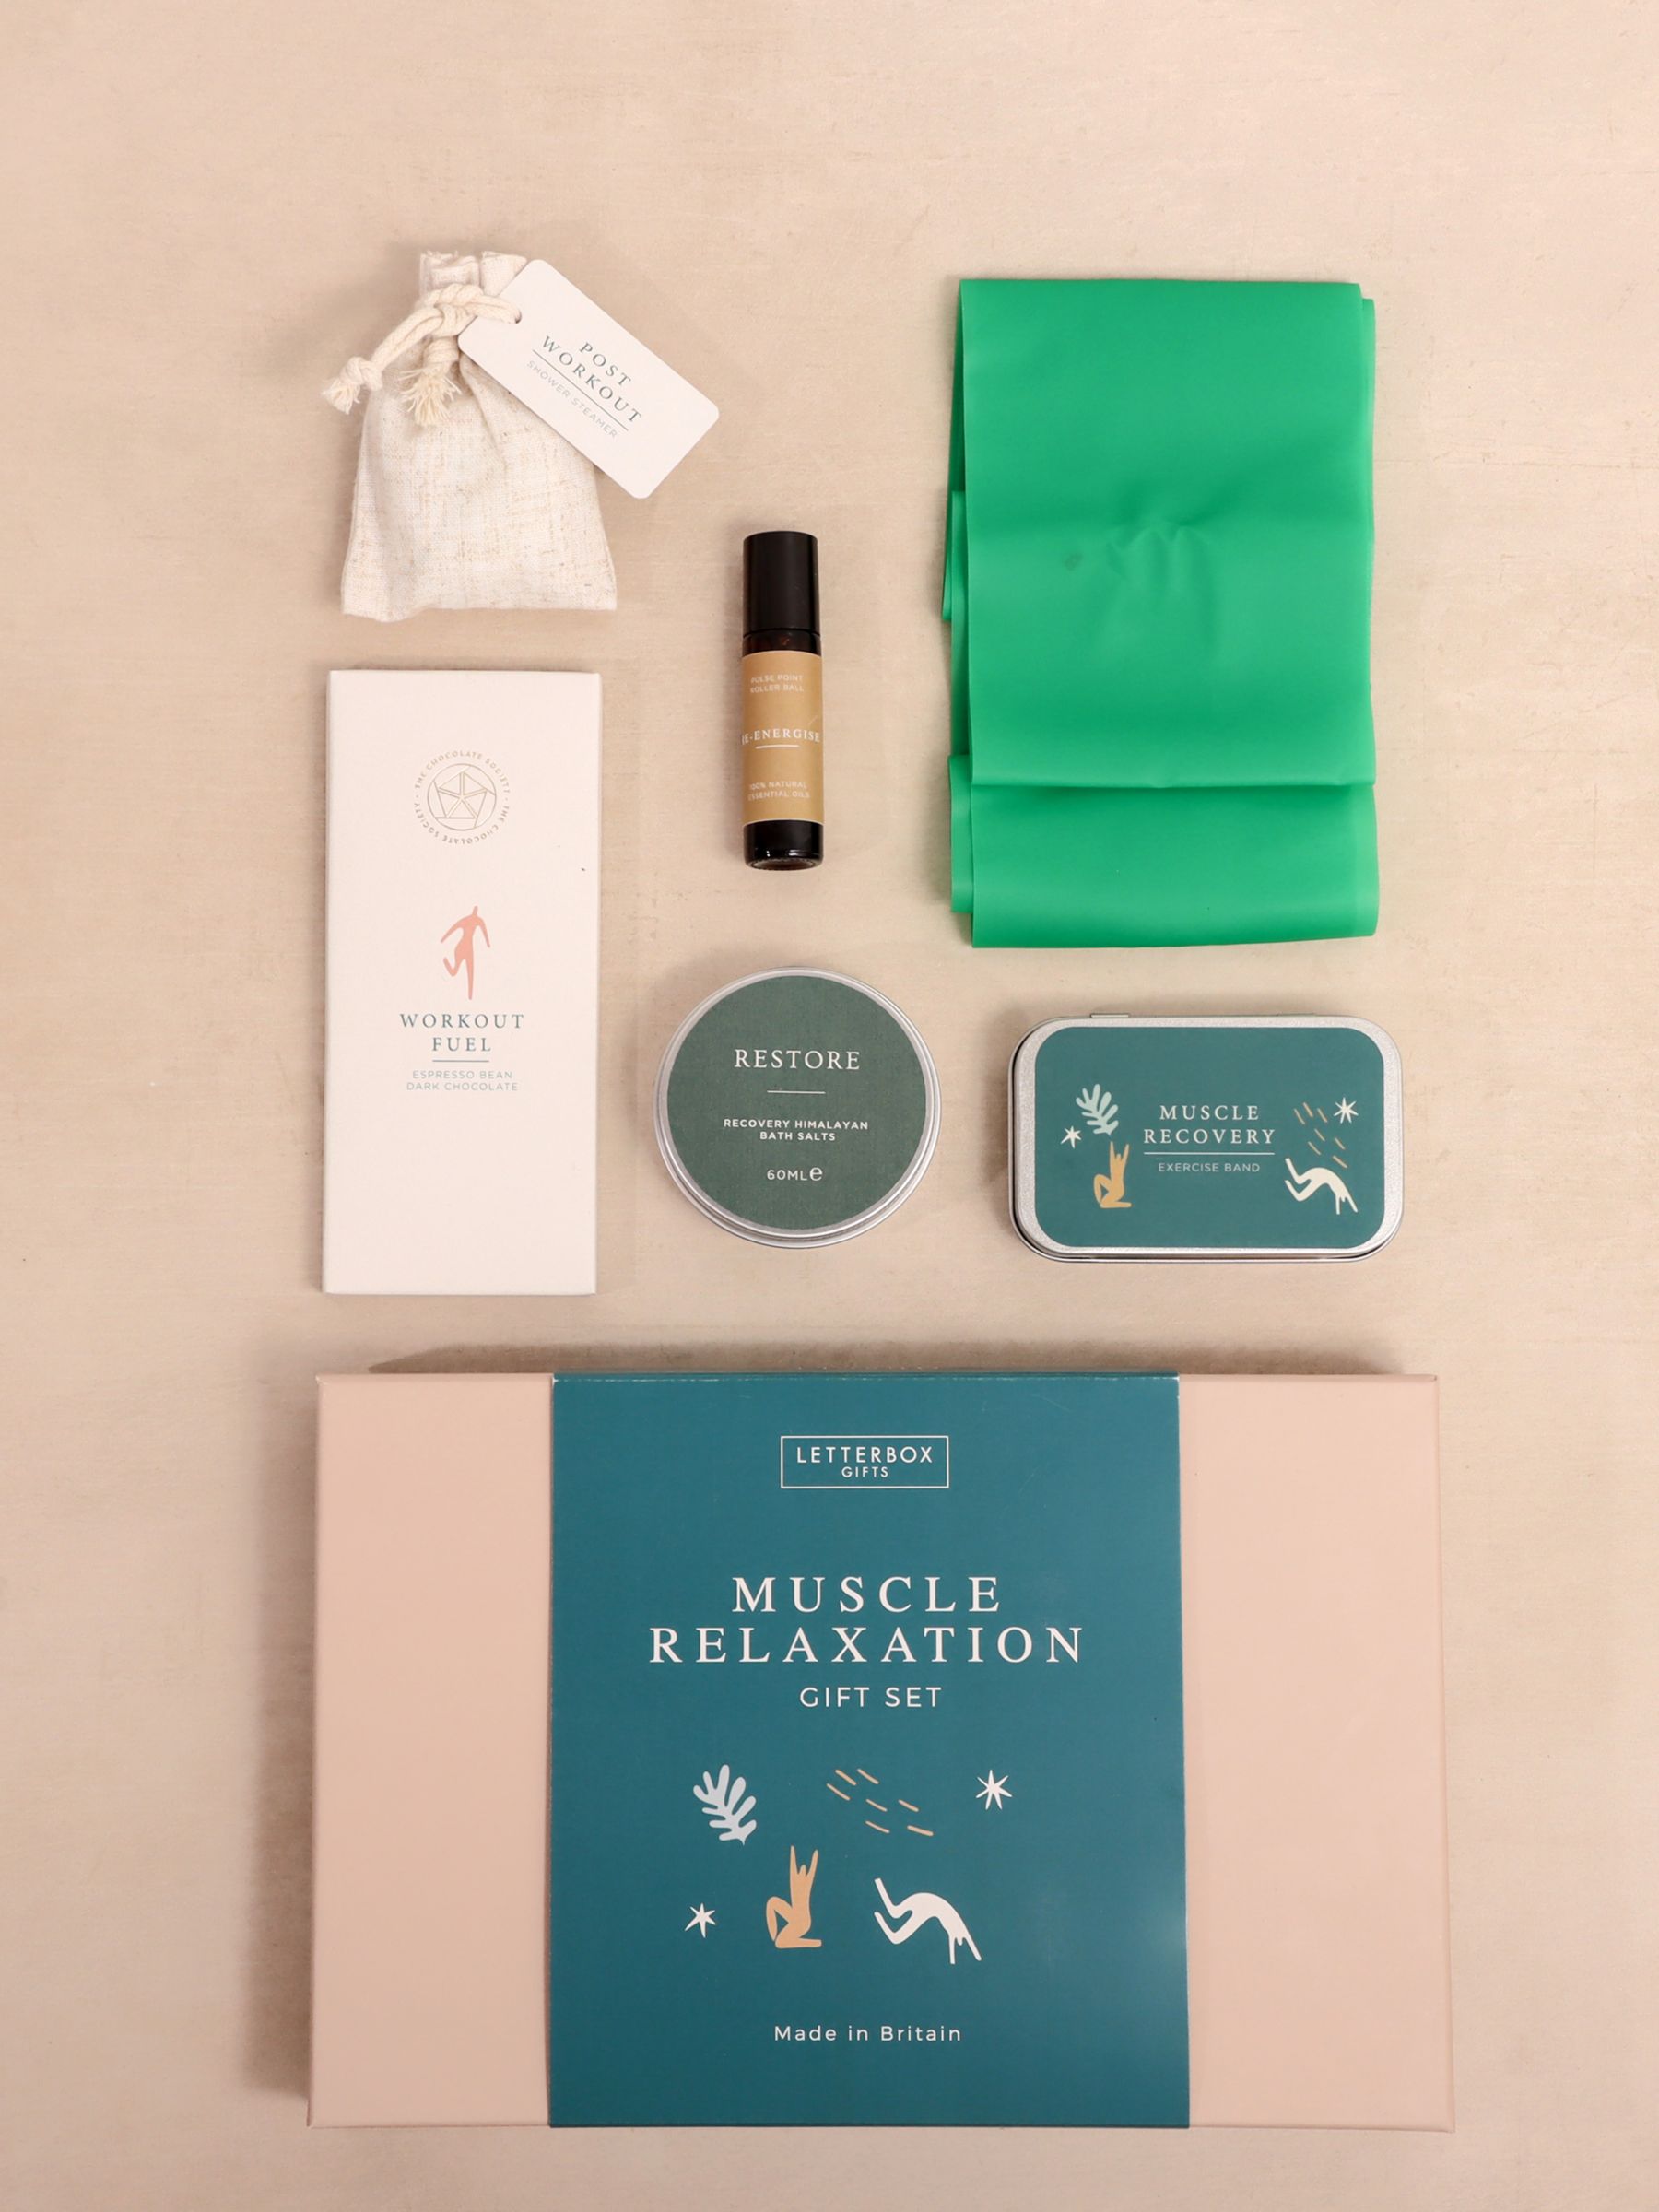 Letterbox Gifts Muscle Relaxation Gift Set 4